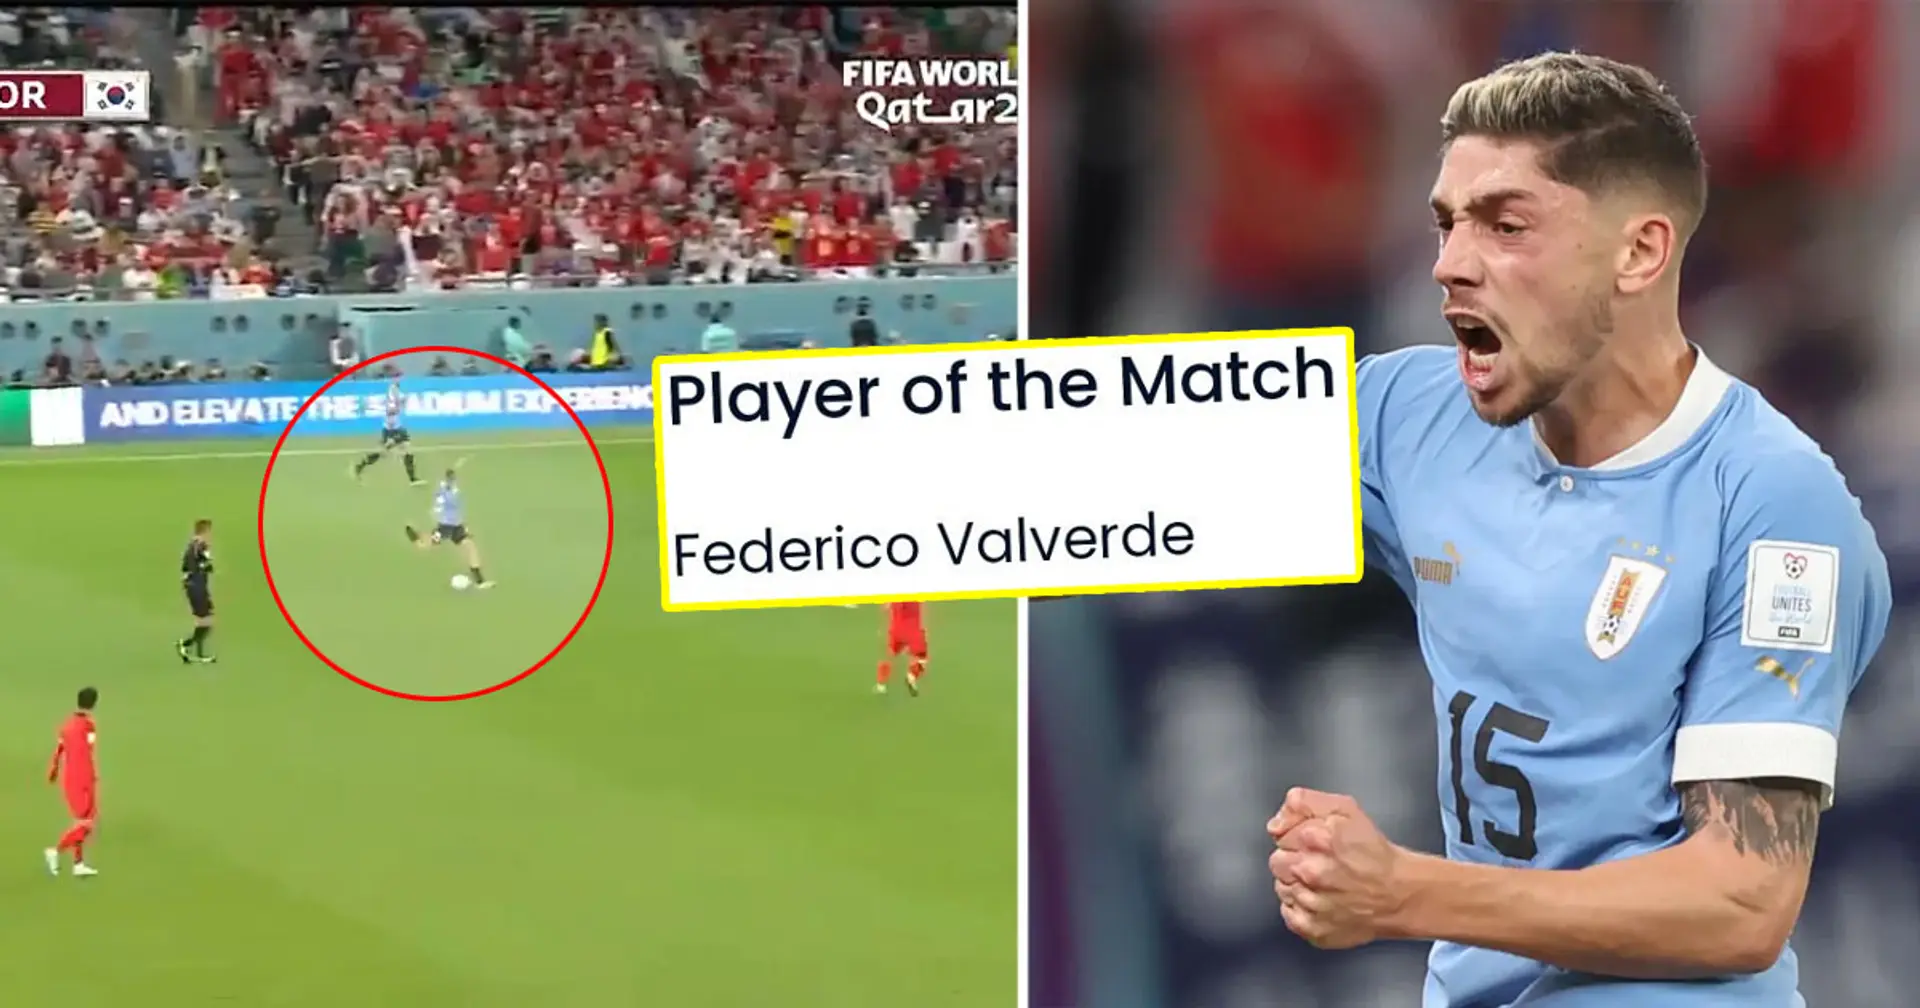 Valverde named MOTM, nearly scores a banger in Uruguay's opener at World Cup